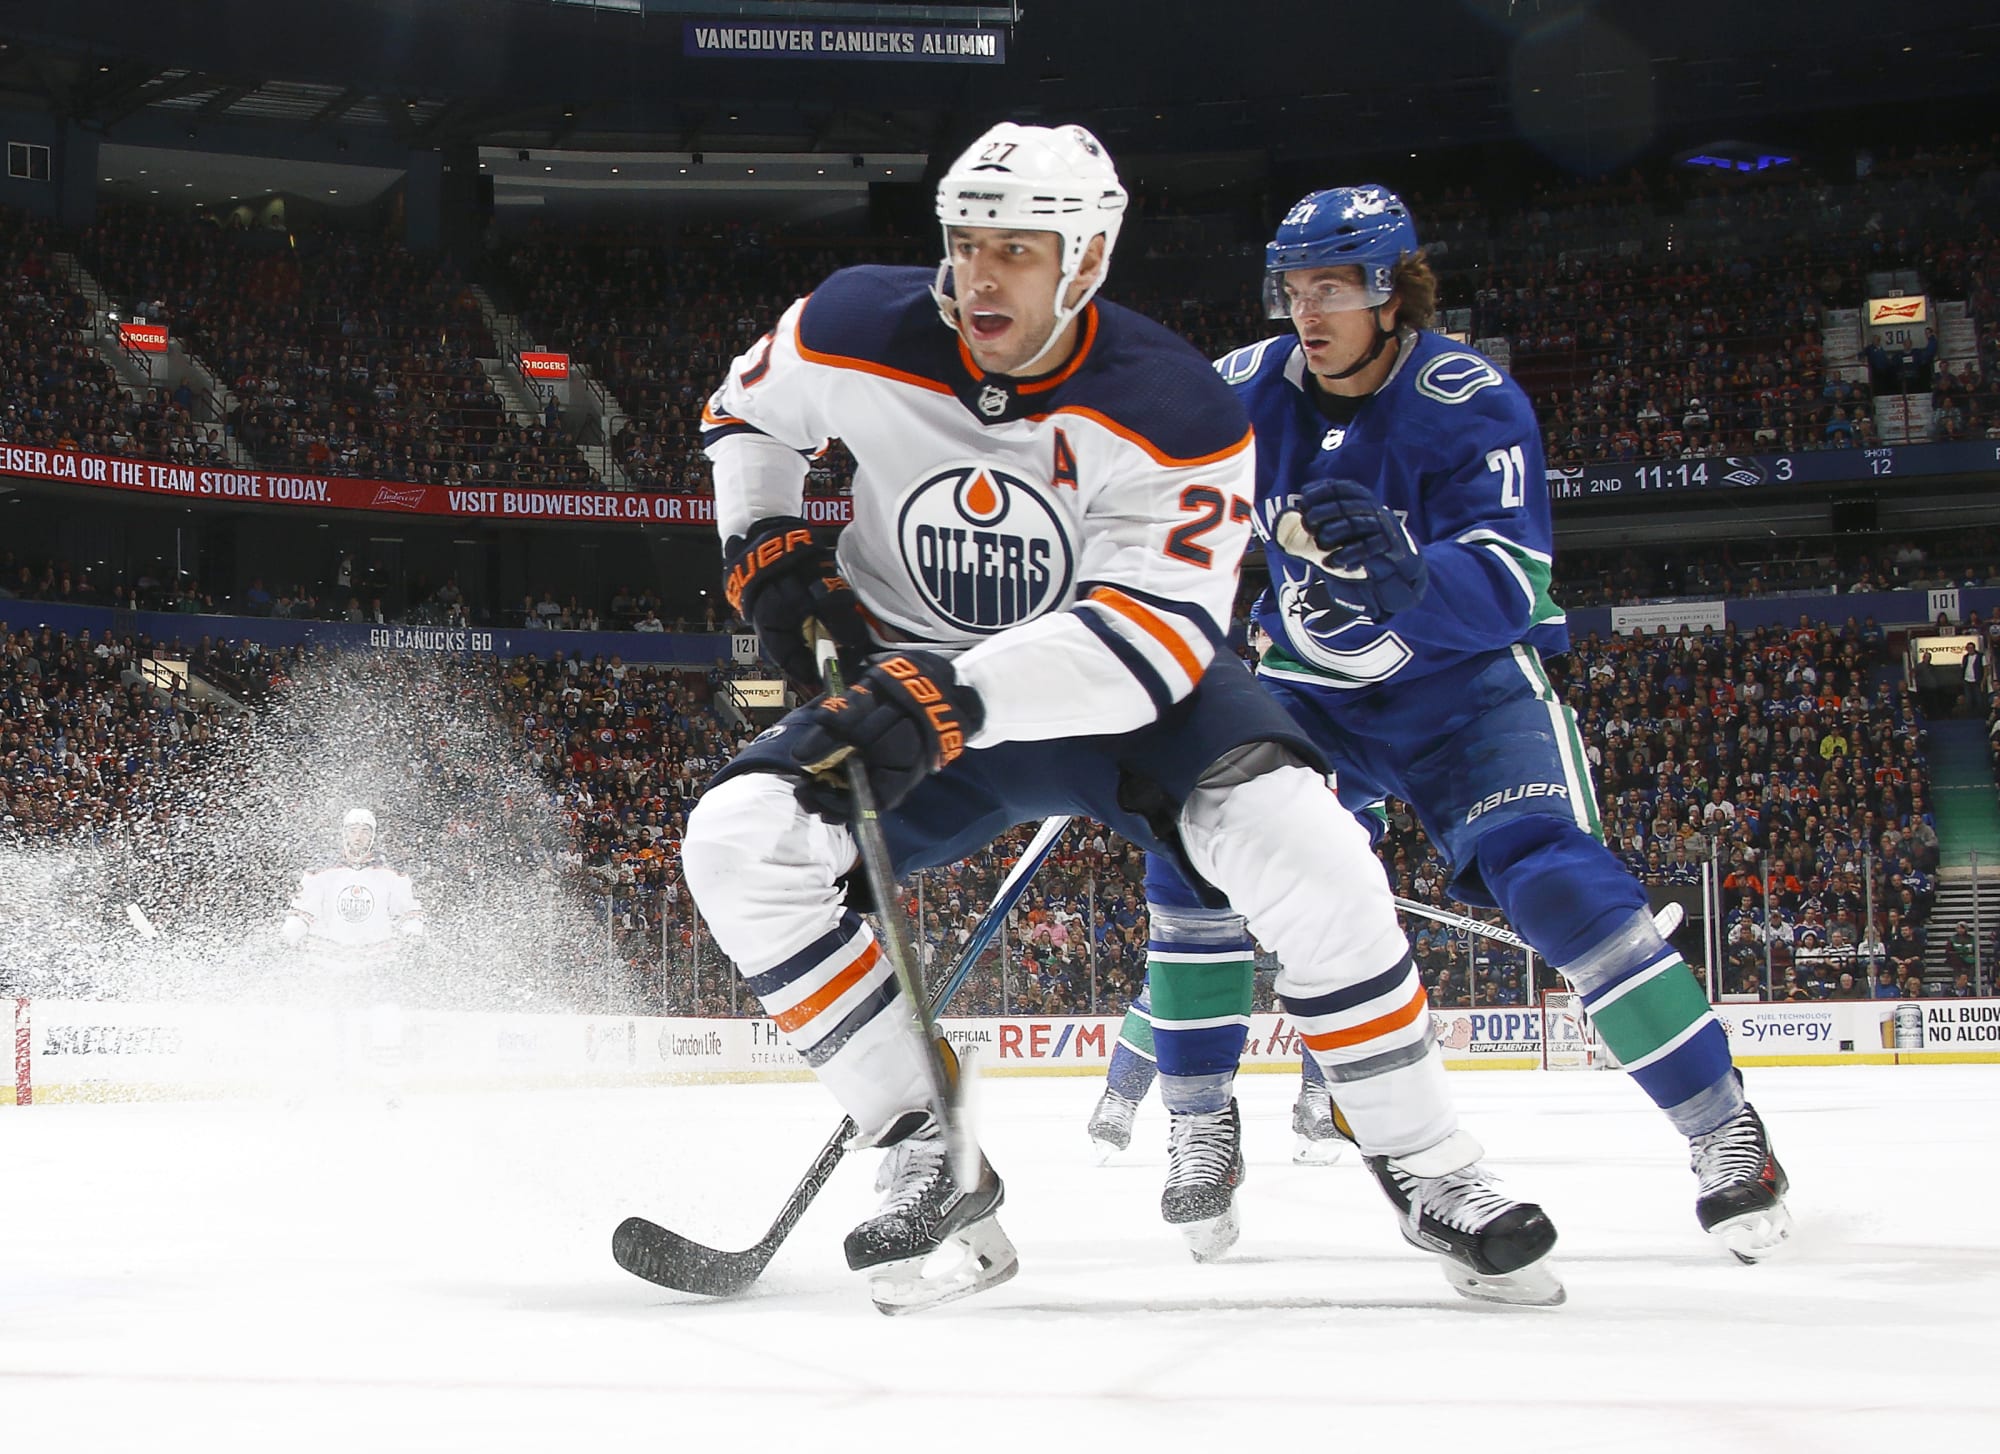 Milan Lucic on possibly joining the Vancouver Canucks